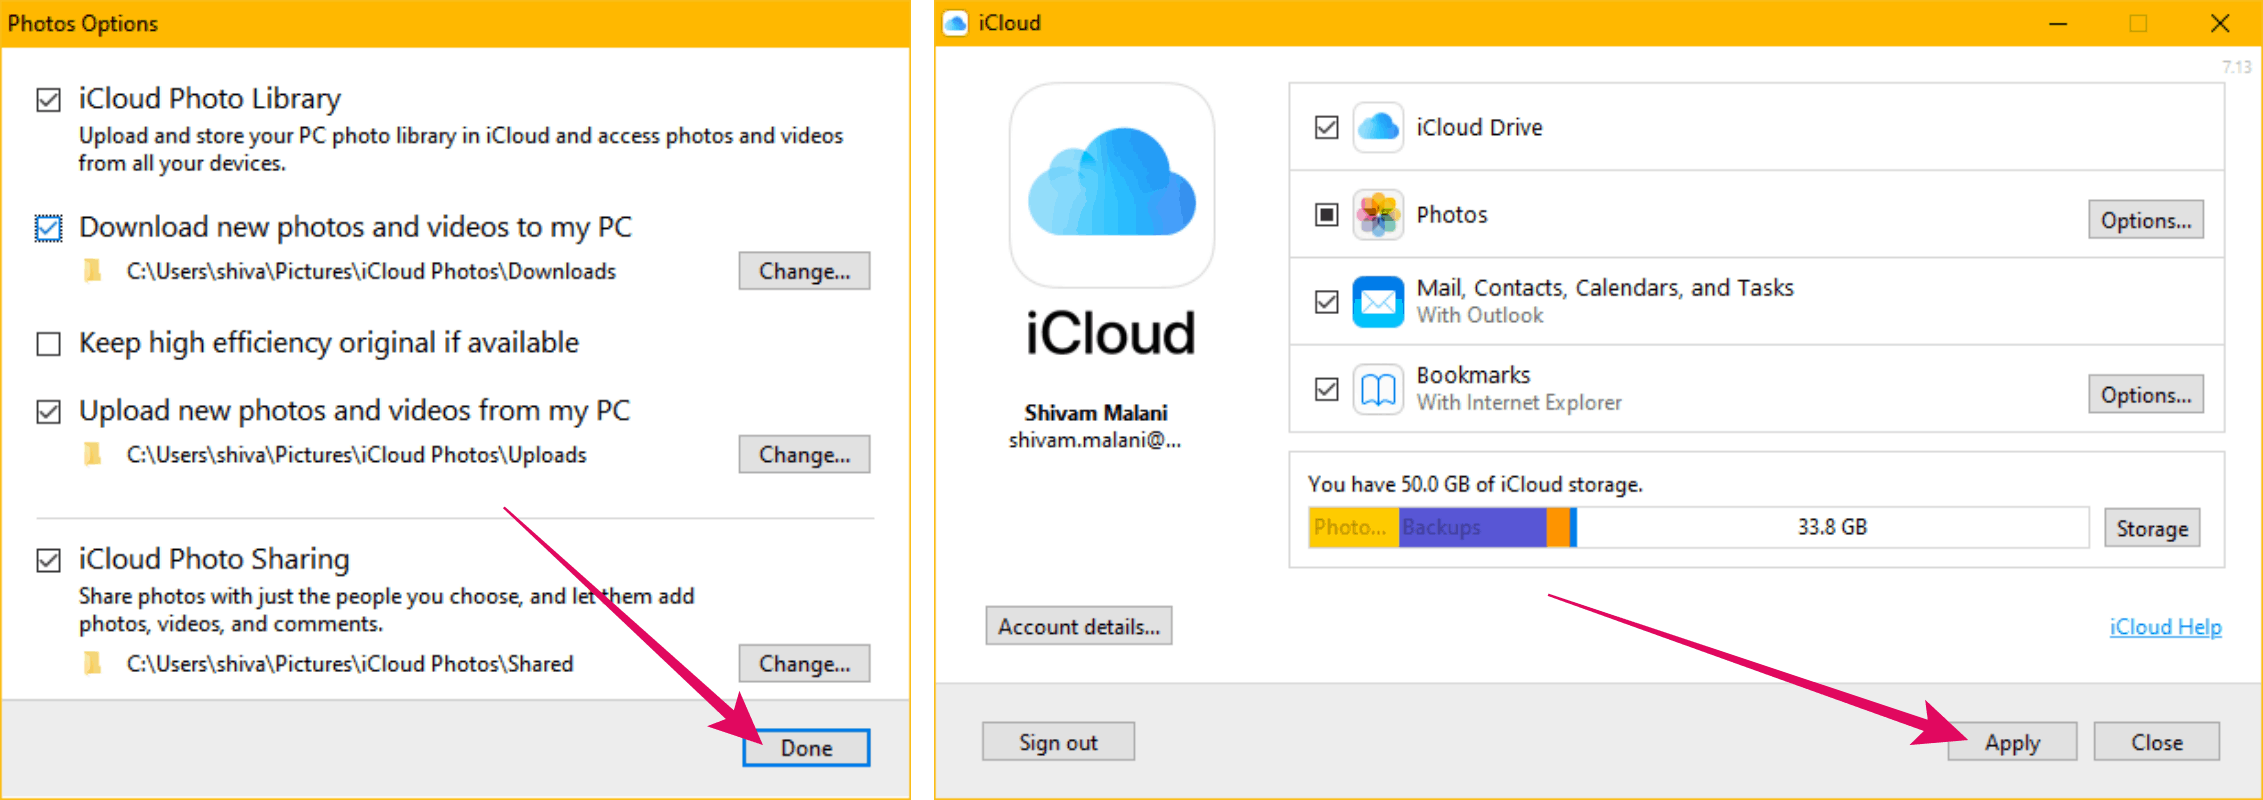 iCloud Windows save settings and sync options.png